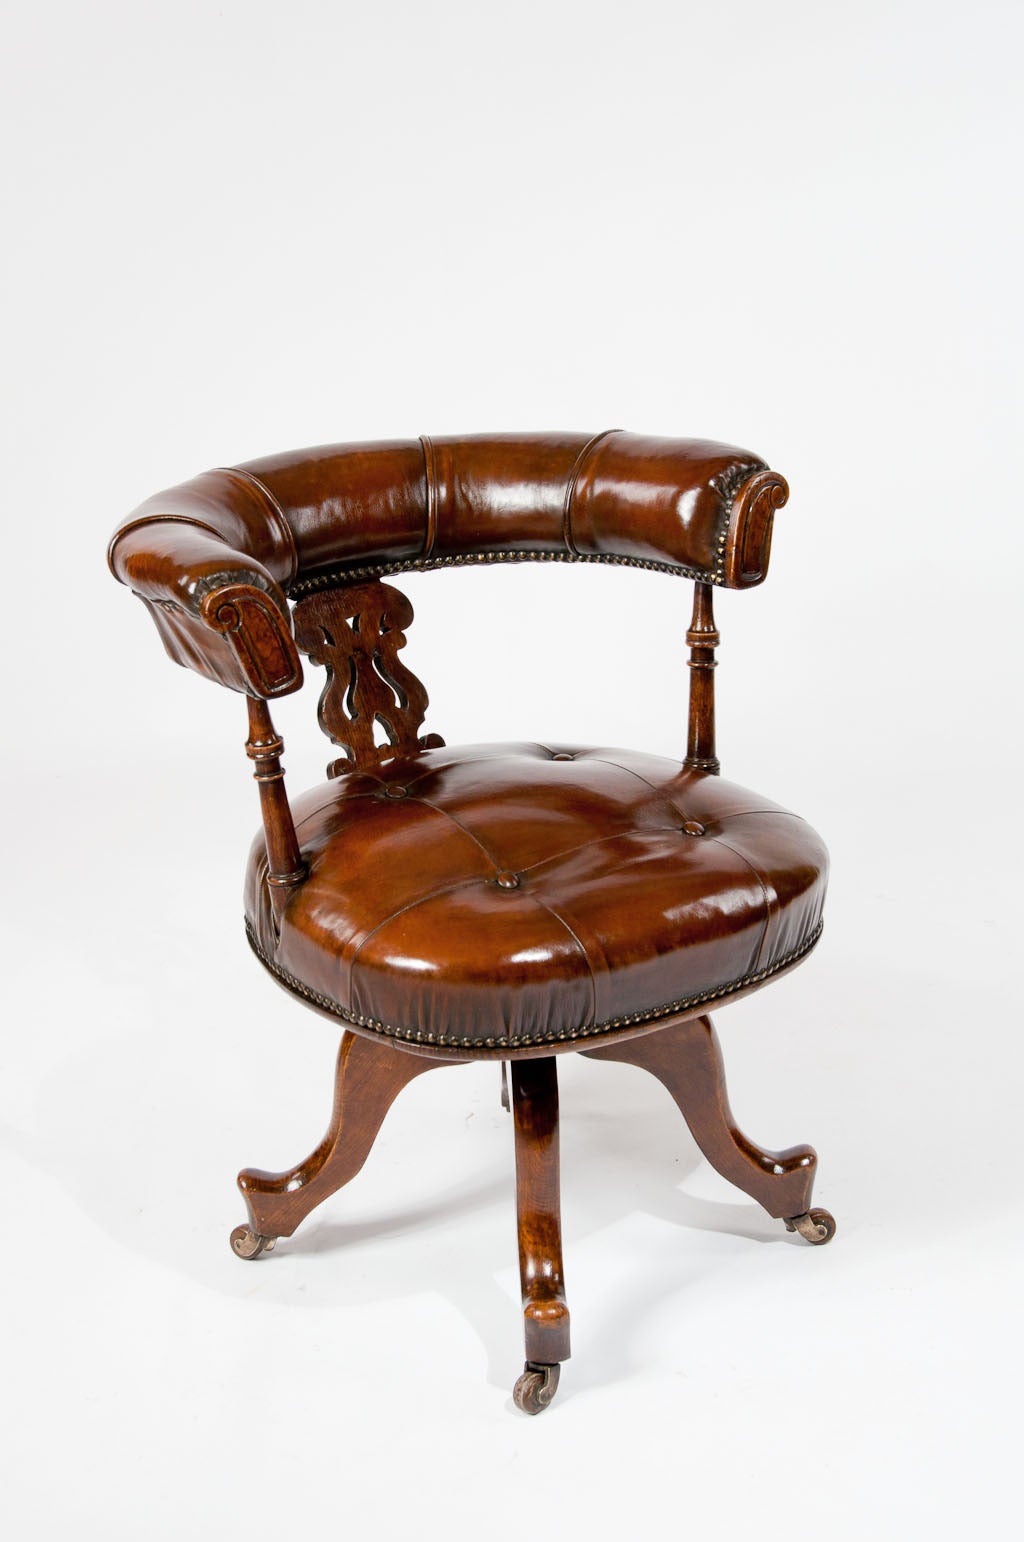 A good quality Victorian oak leather upholstered and buttoned swivel desk chair. Dating to circa 1880 this quality swivel desk chair has a leather upholstered shaped back for comfort supported by a shaped oak splat and finely turned columns to the